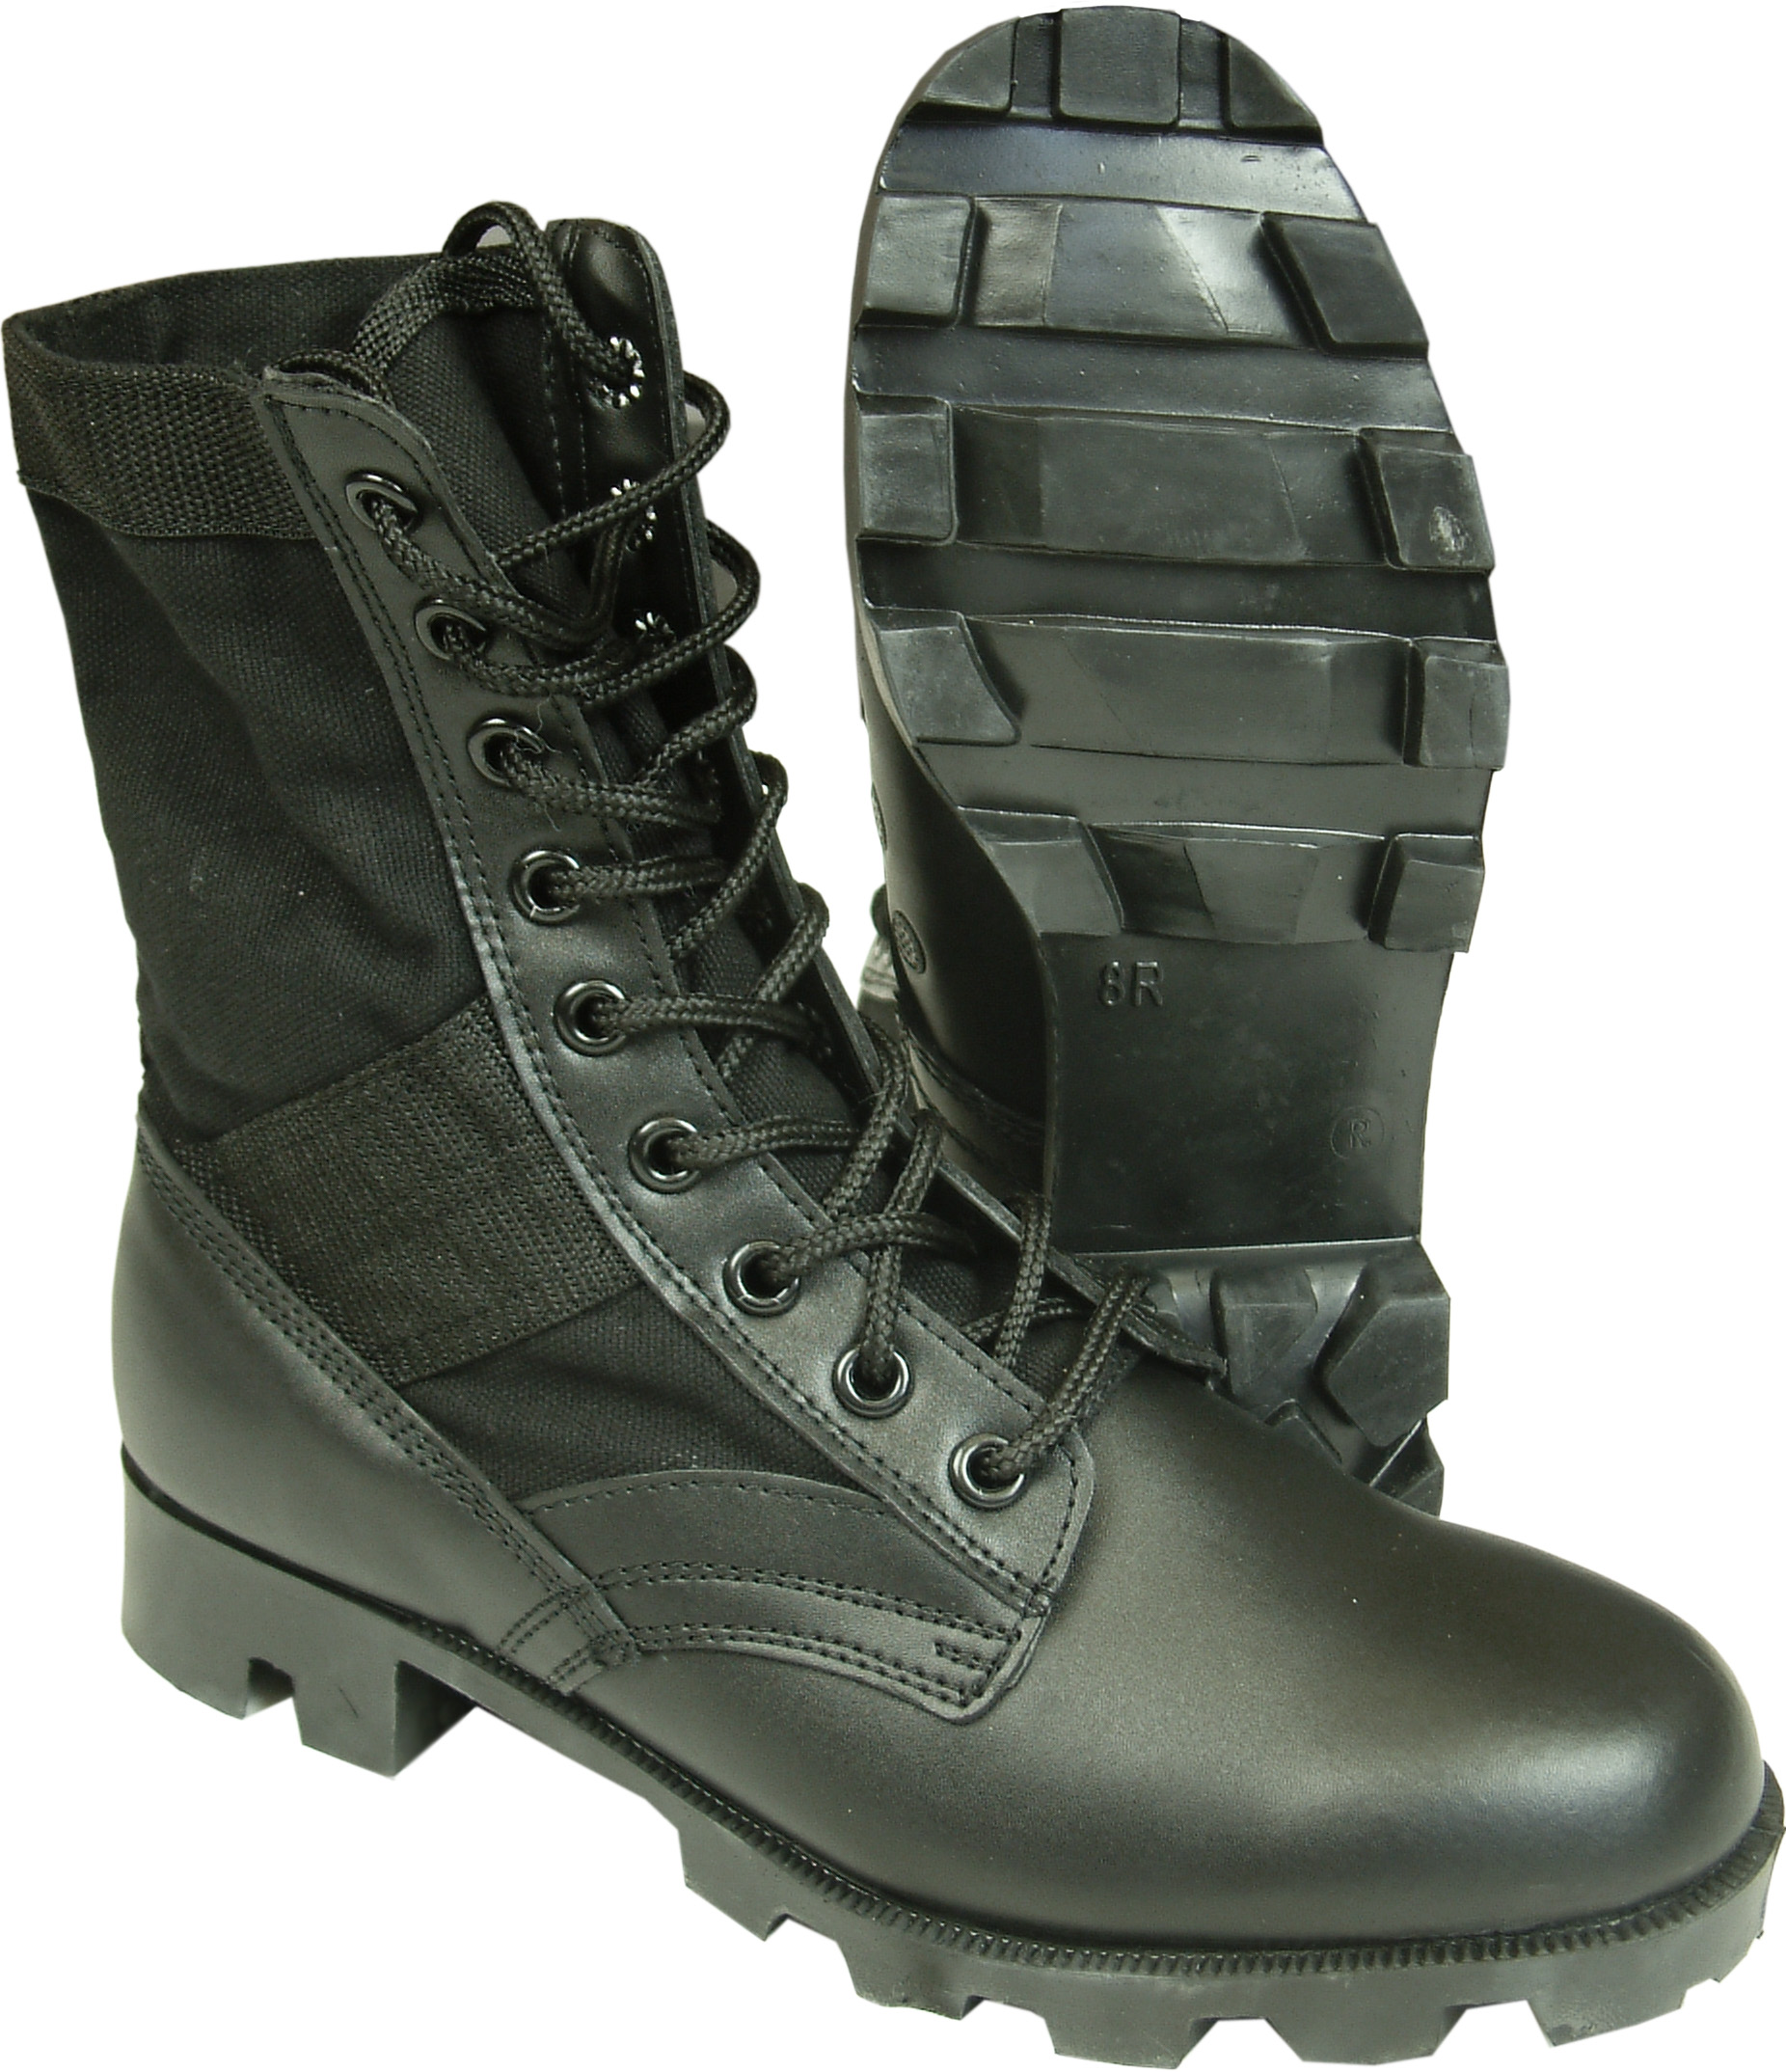 Jungle Boots with Screened Eyelets by 